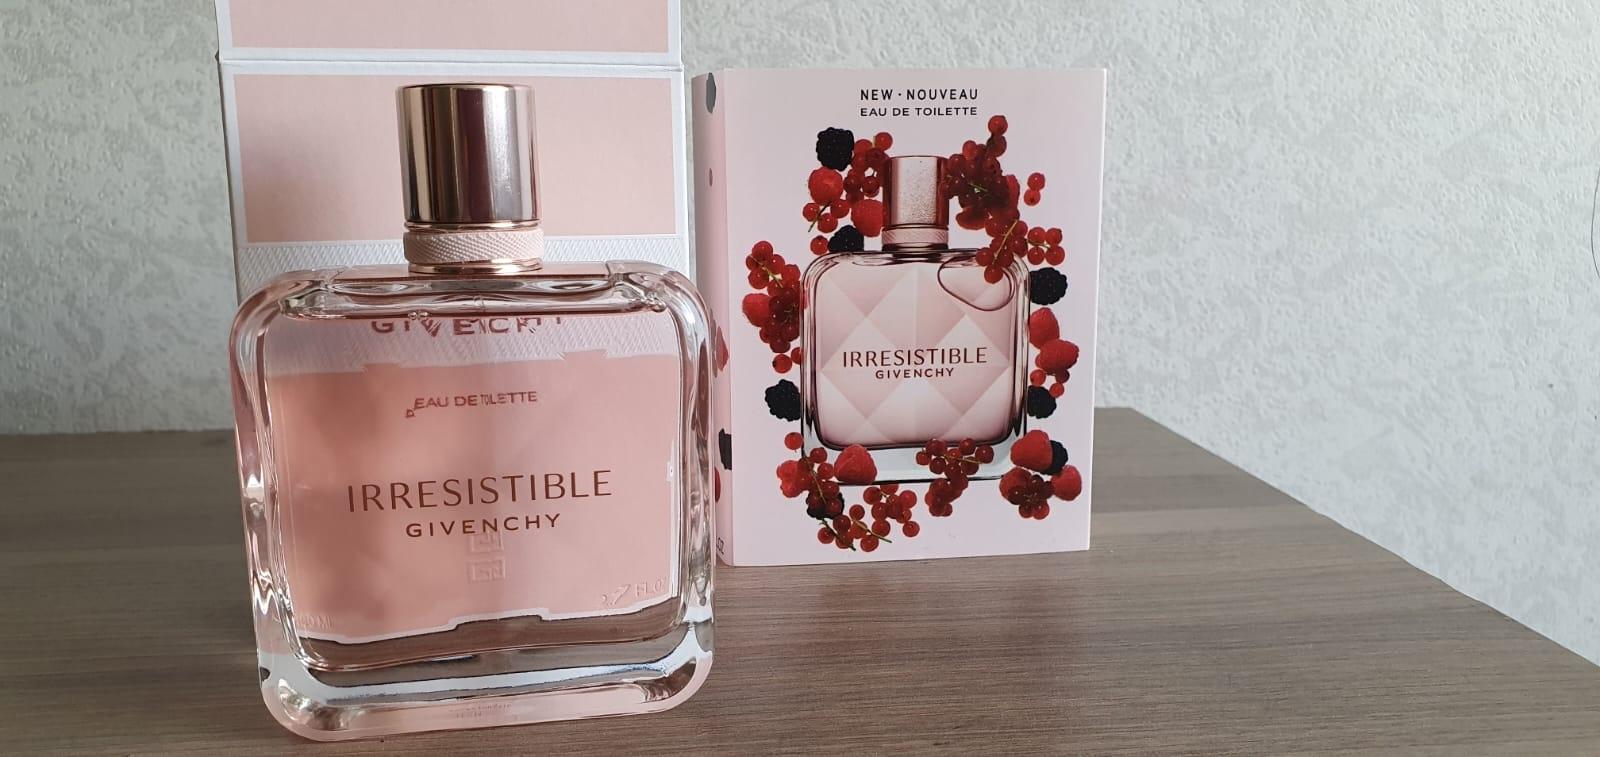 Givenchy irresistible toilette. Irresistible Givenchy парфюмерная вода. Аромат Givenchy irresistible. Givenchy irresistible 80ml. Givenchy irresistible 80 мл.